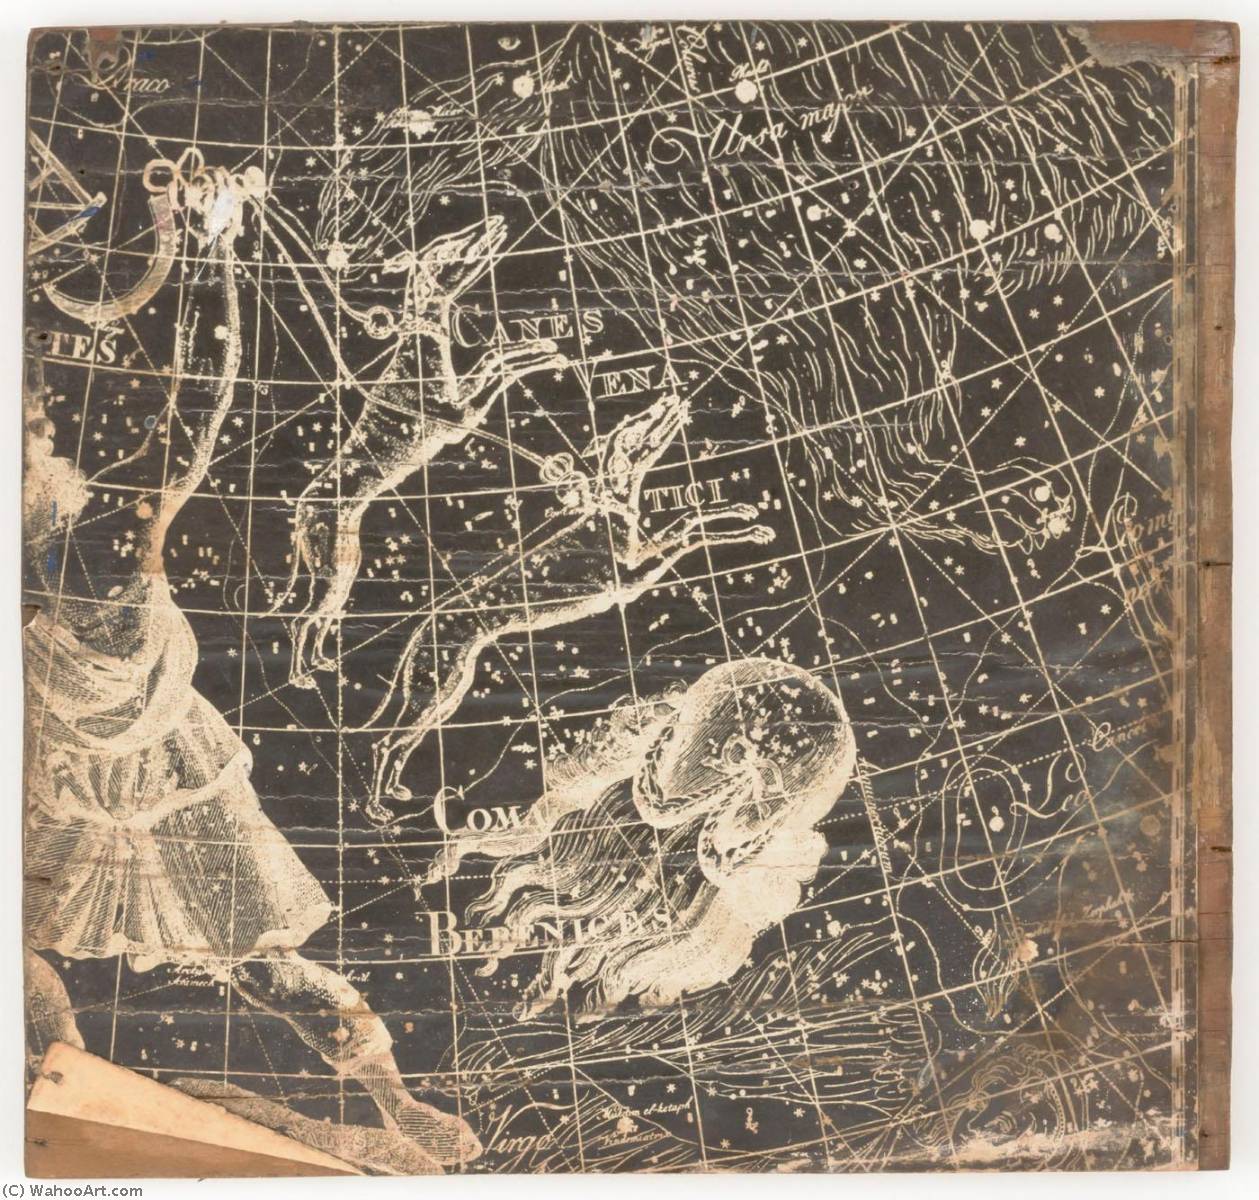 WikiOO.org - 백과 사전 - 회화, 삽화 Joseph Cornell - Untitled (stellar map featuring Canis Vena Tici and Coma Berenices)